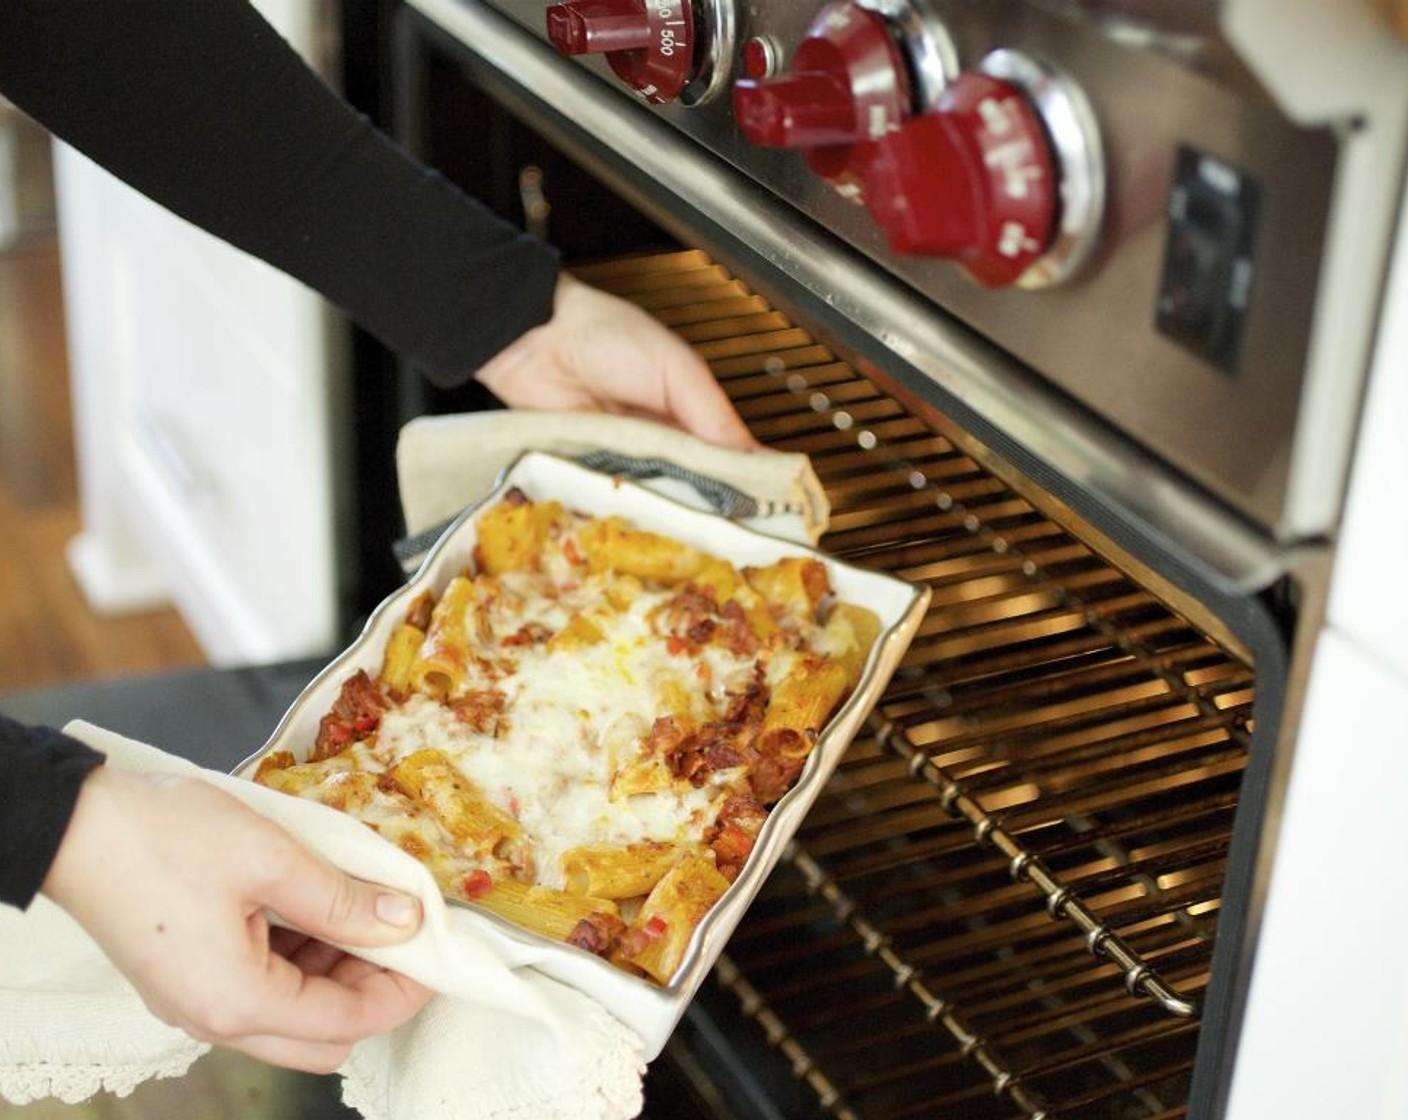 step 17 Serve the baked rigatoni family-style, in the baking dish. Offer the garlic bread wrapped in a colorful cloth napkin in a basket or on a plate. Serve and enjoy!